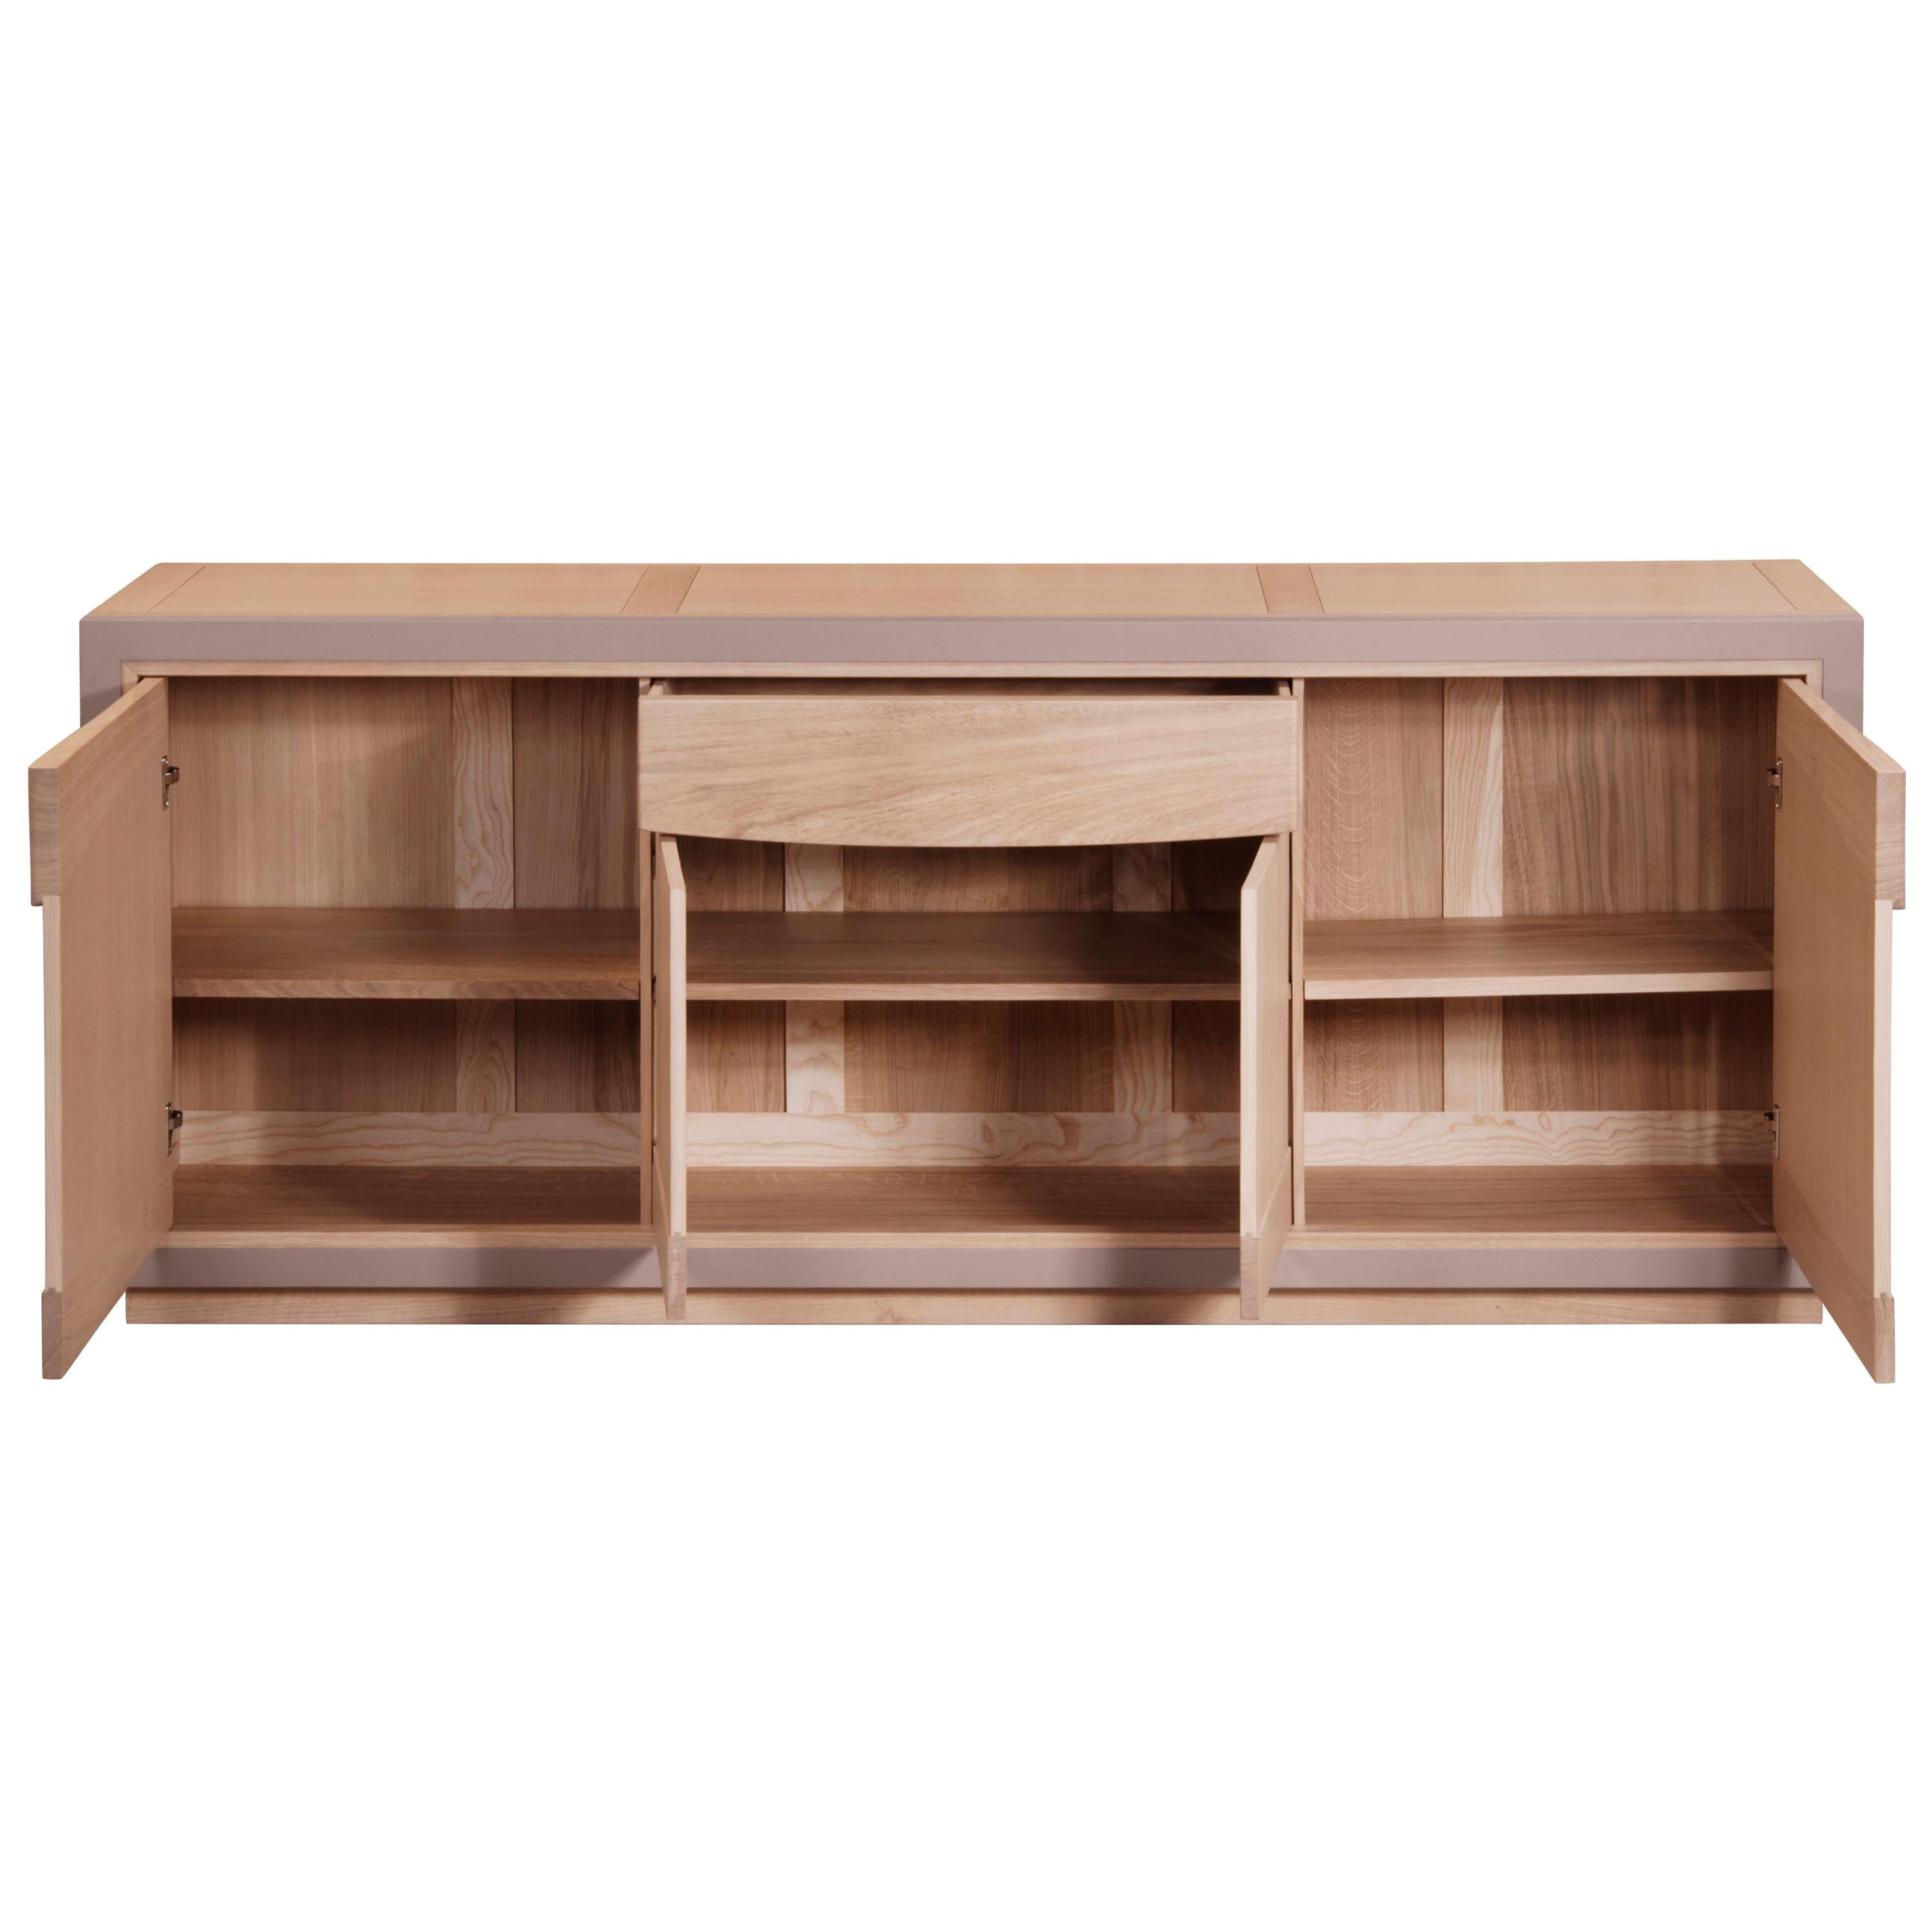 French 4-Door Sideboard in Natural Solid Oak, Design C. Lecomte, 100% Made in France For Sale